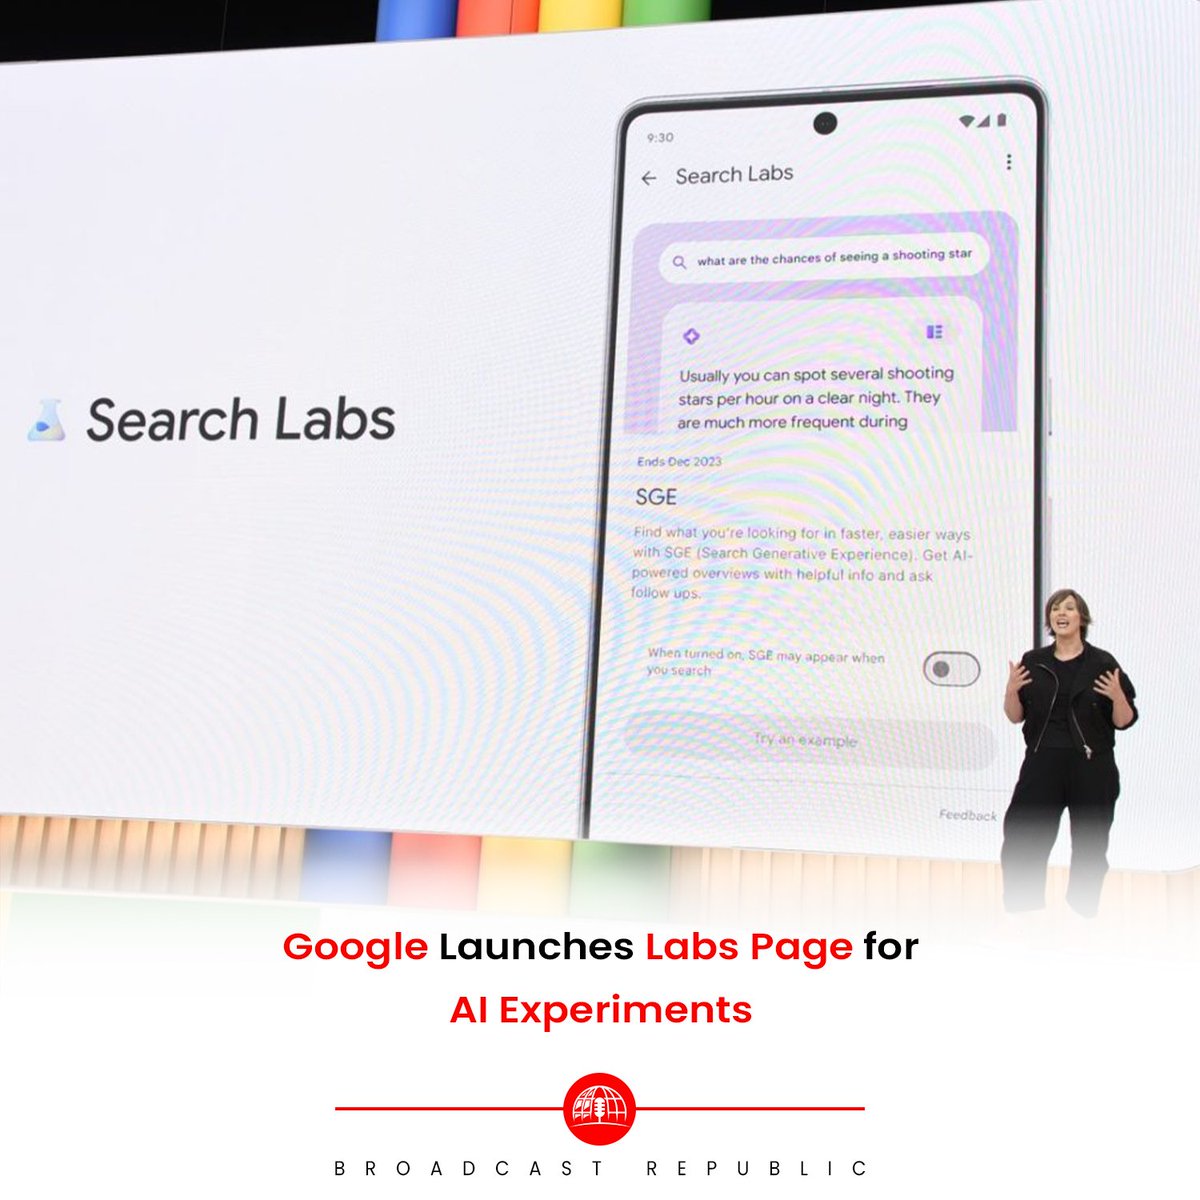 Google's new Labs page allows users to sign up and test AI-powered features before wider release. The page currently offers four projects, including AI-powered Google search features, Tailwind, MusicLM, and AI in Google Workspaces. 

#BroadcastRepublic #GoogleLabs #AIexperiments